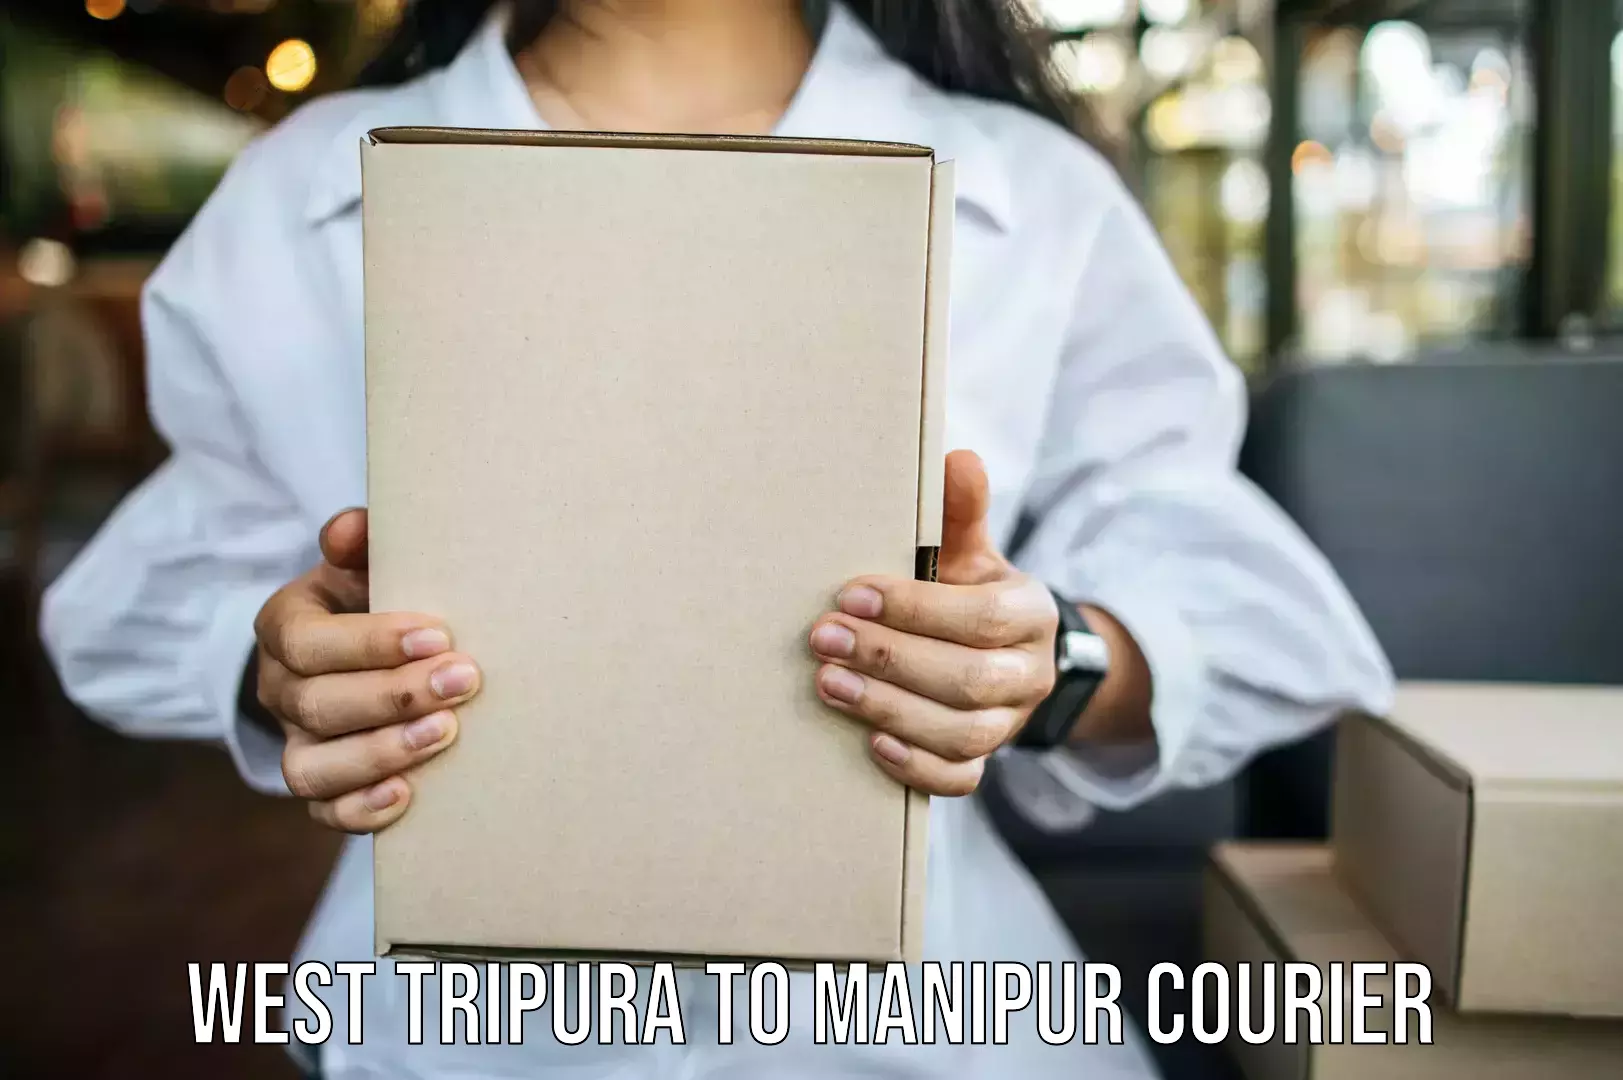 Furniture moving experts West Tripura to Manipur